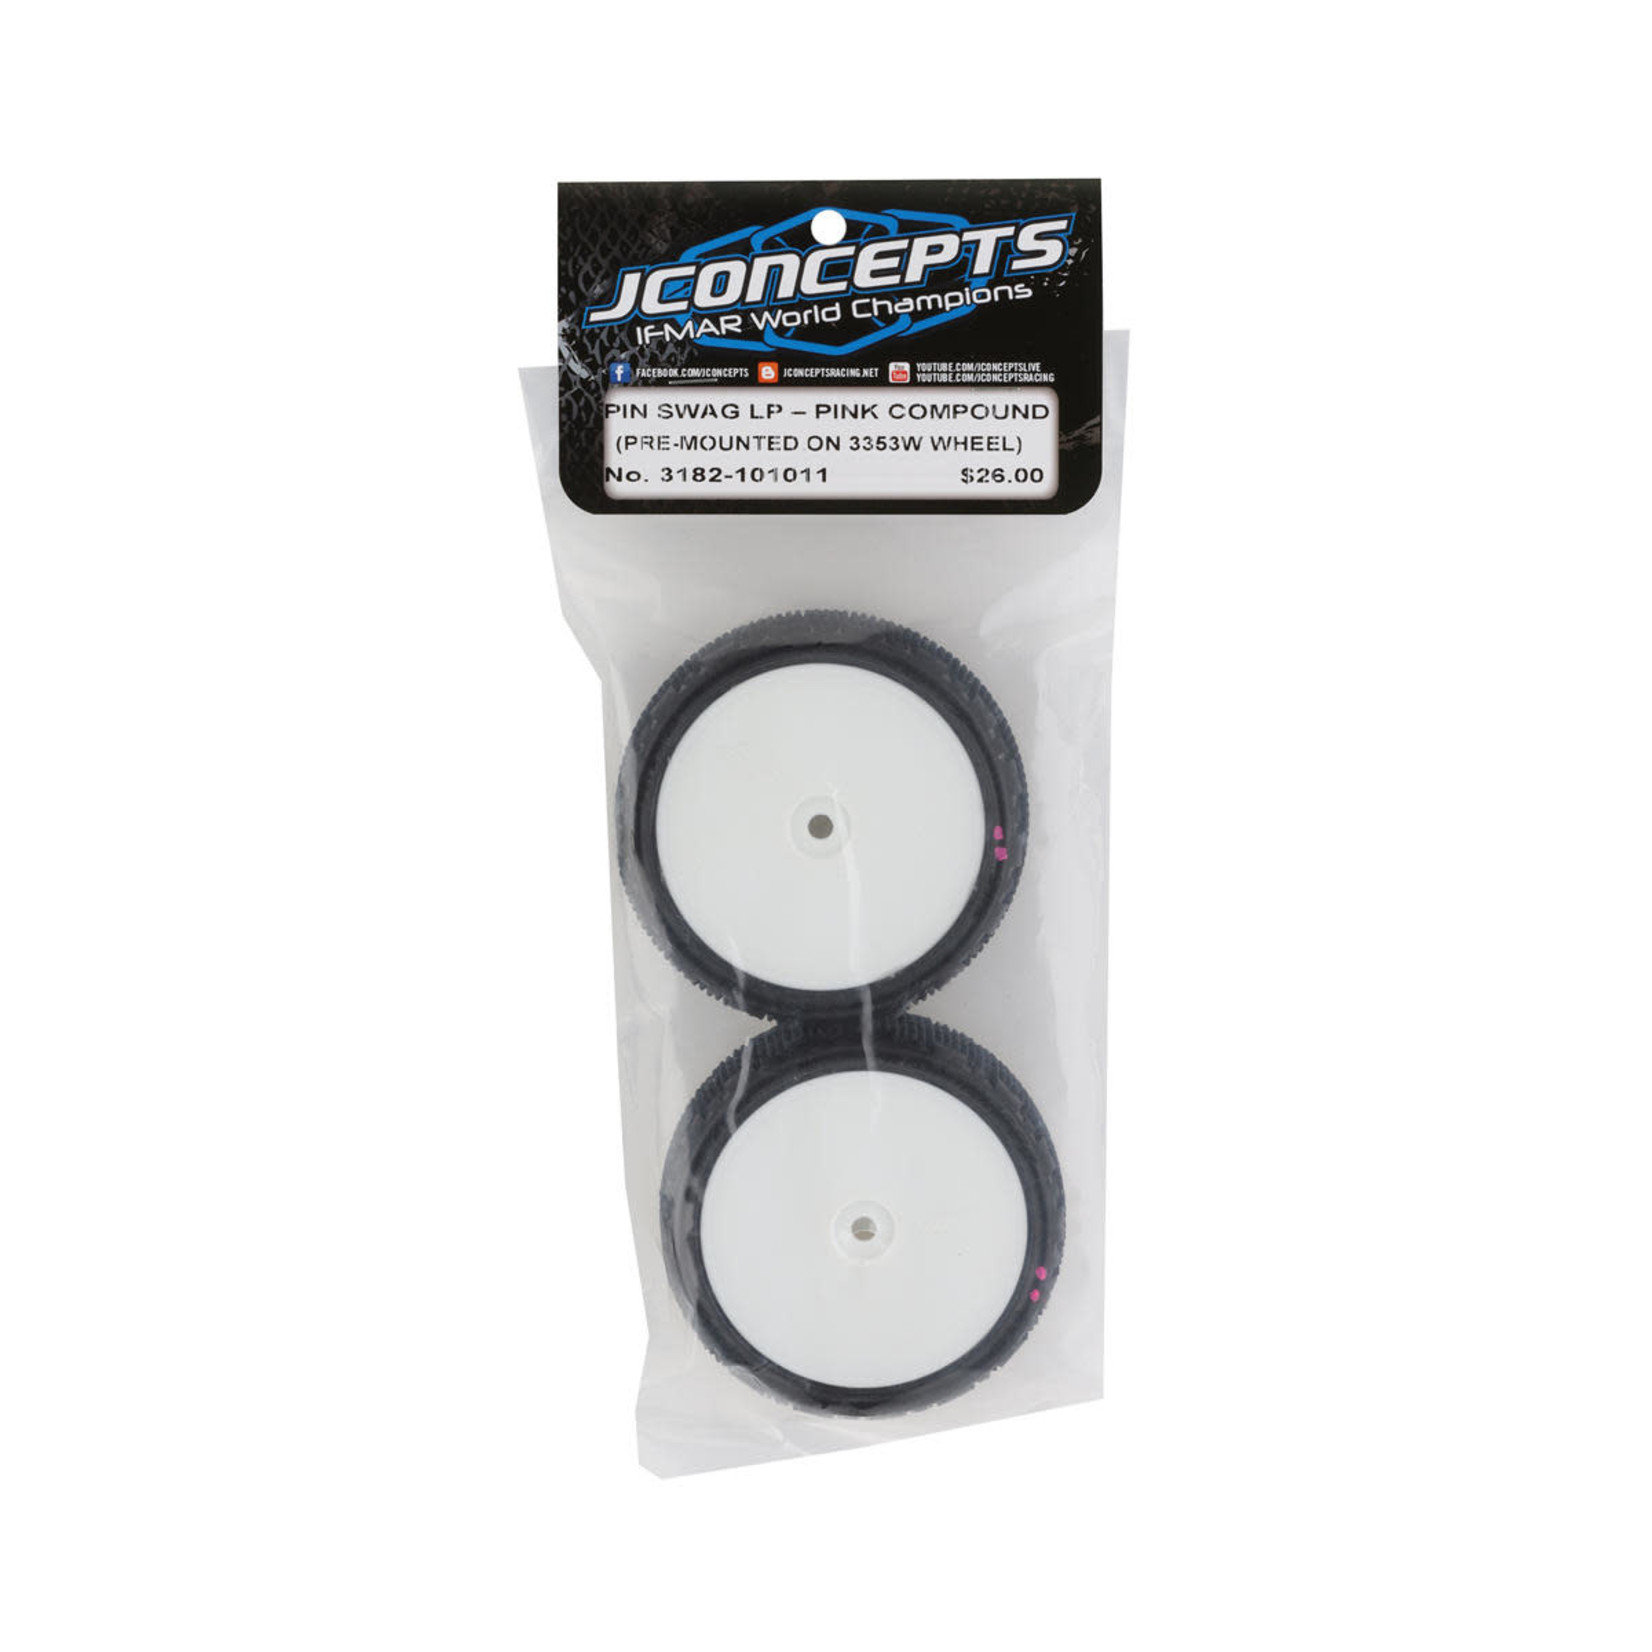 JConcepts JConcepts Pin Swag 2.2" Pre-Mounted 4WD Front Buggy Tire (White) (2) (Pink) w/12mm Hex #3182-101011